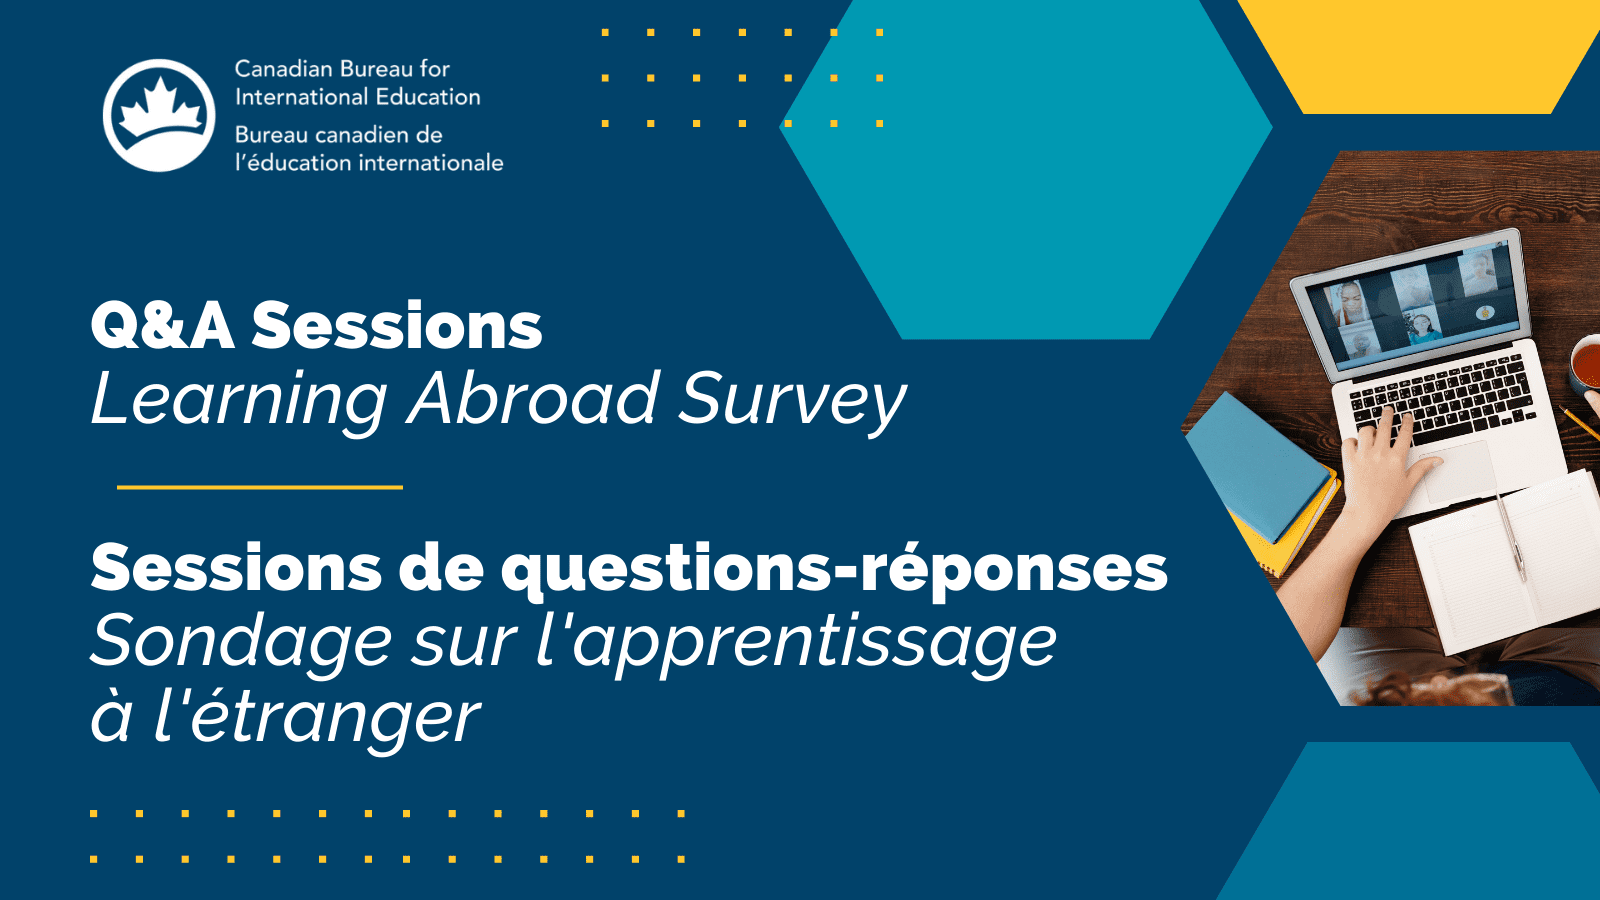 Learning Abroad Survey Q&A Sessions